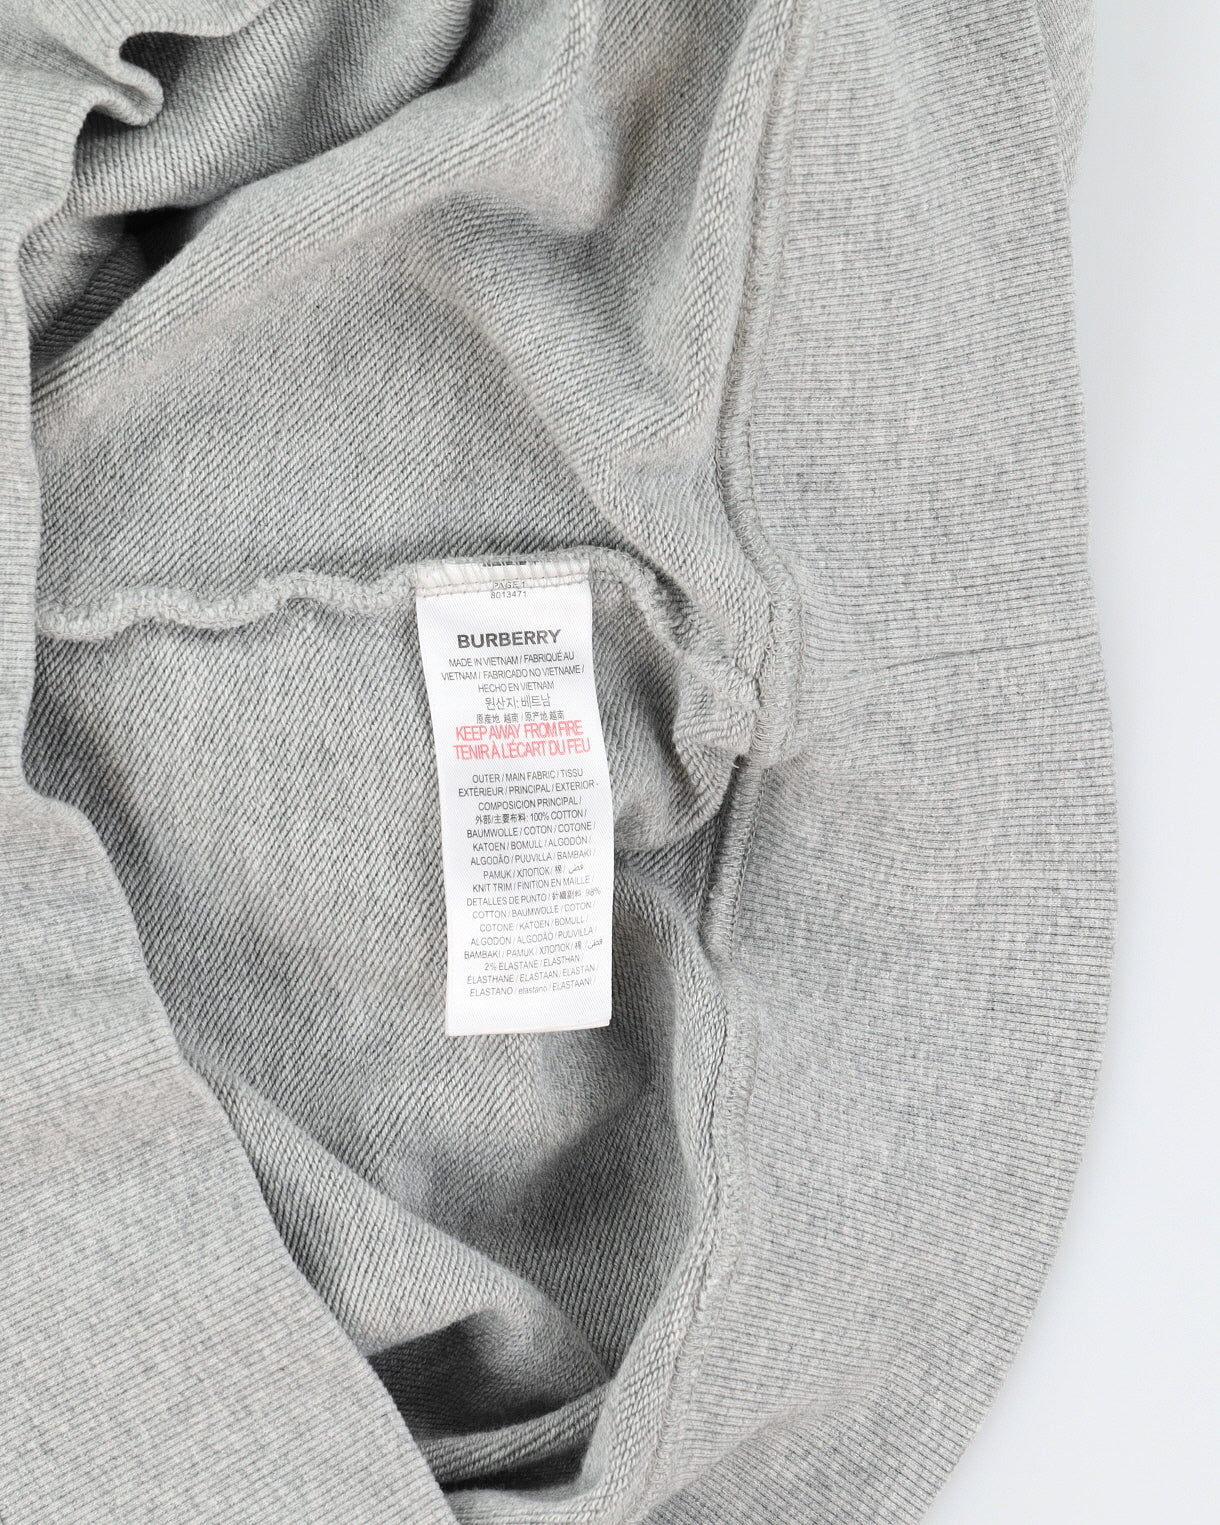 Burberry Archford Pale Grey Oversize Hoodie - M